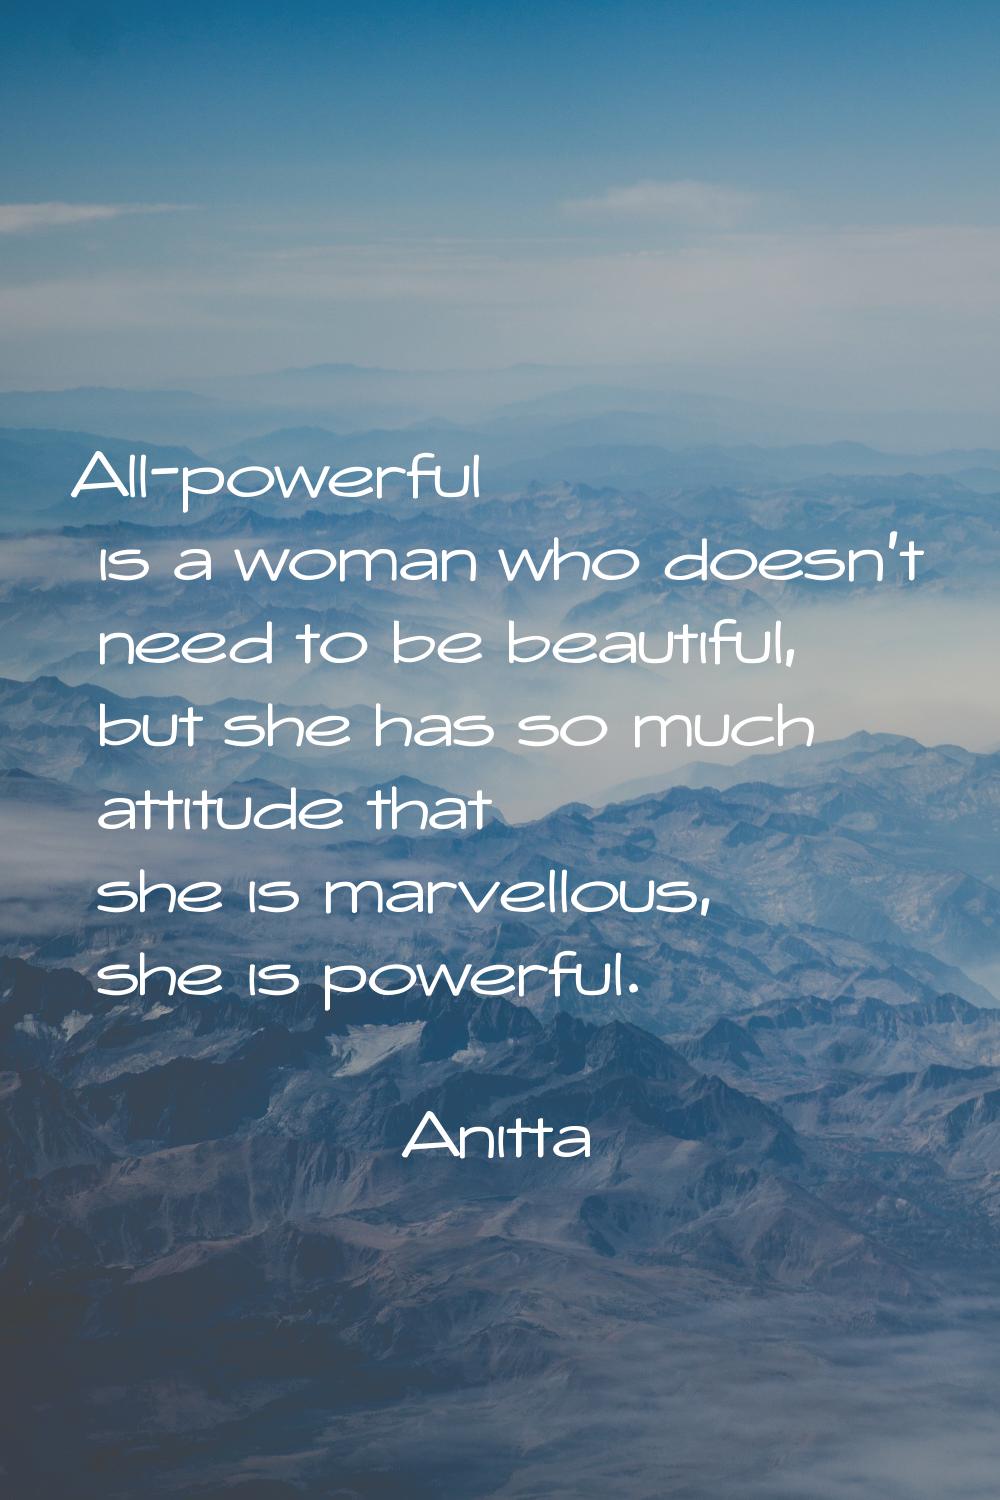 All-powerful is a woman who doesn't need to be beautiful, but she has so much attitude that she is 